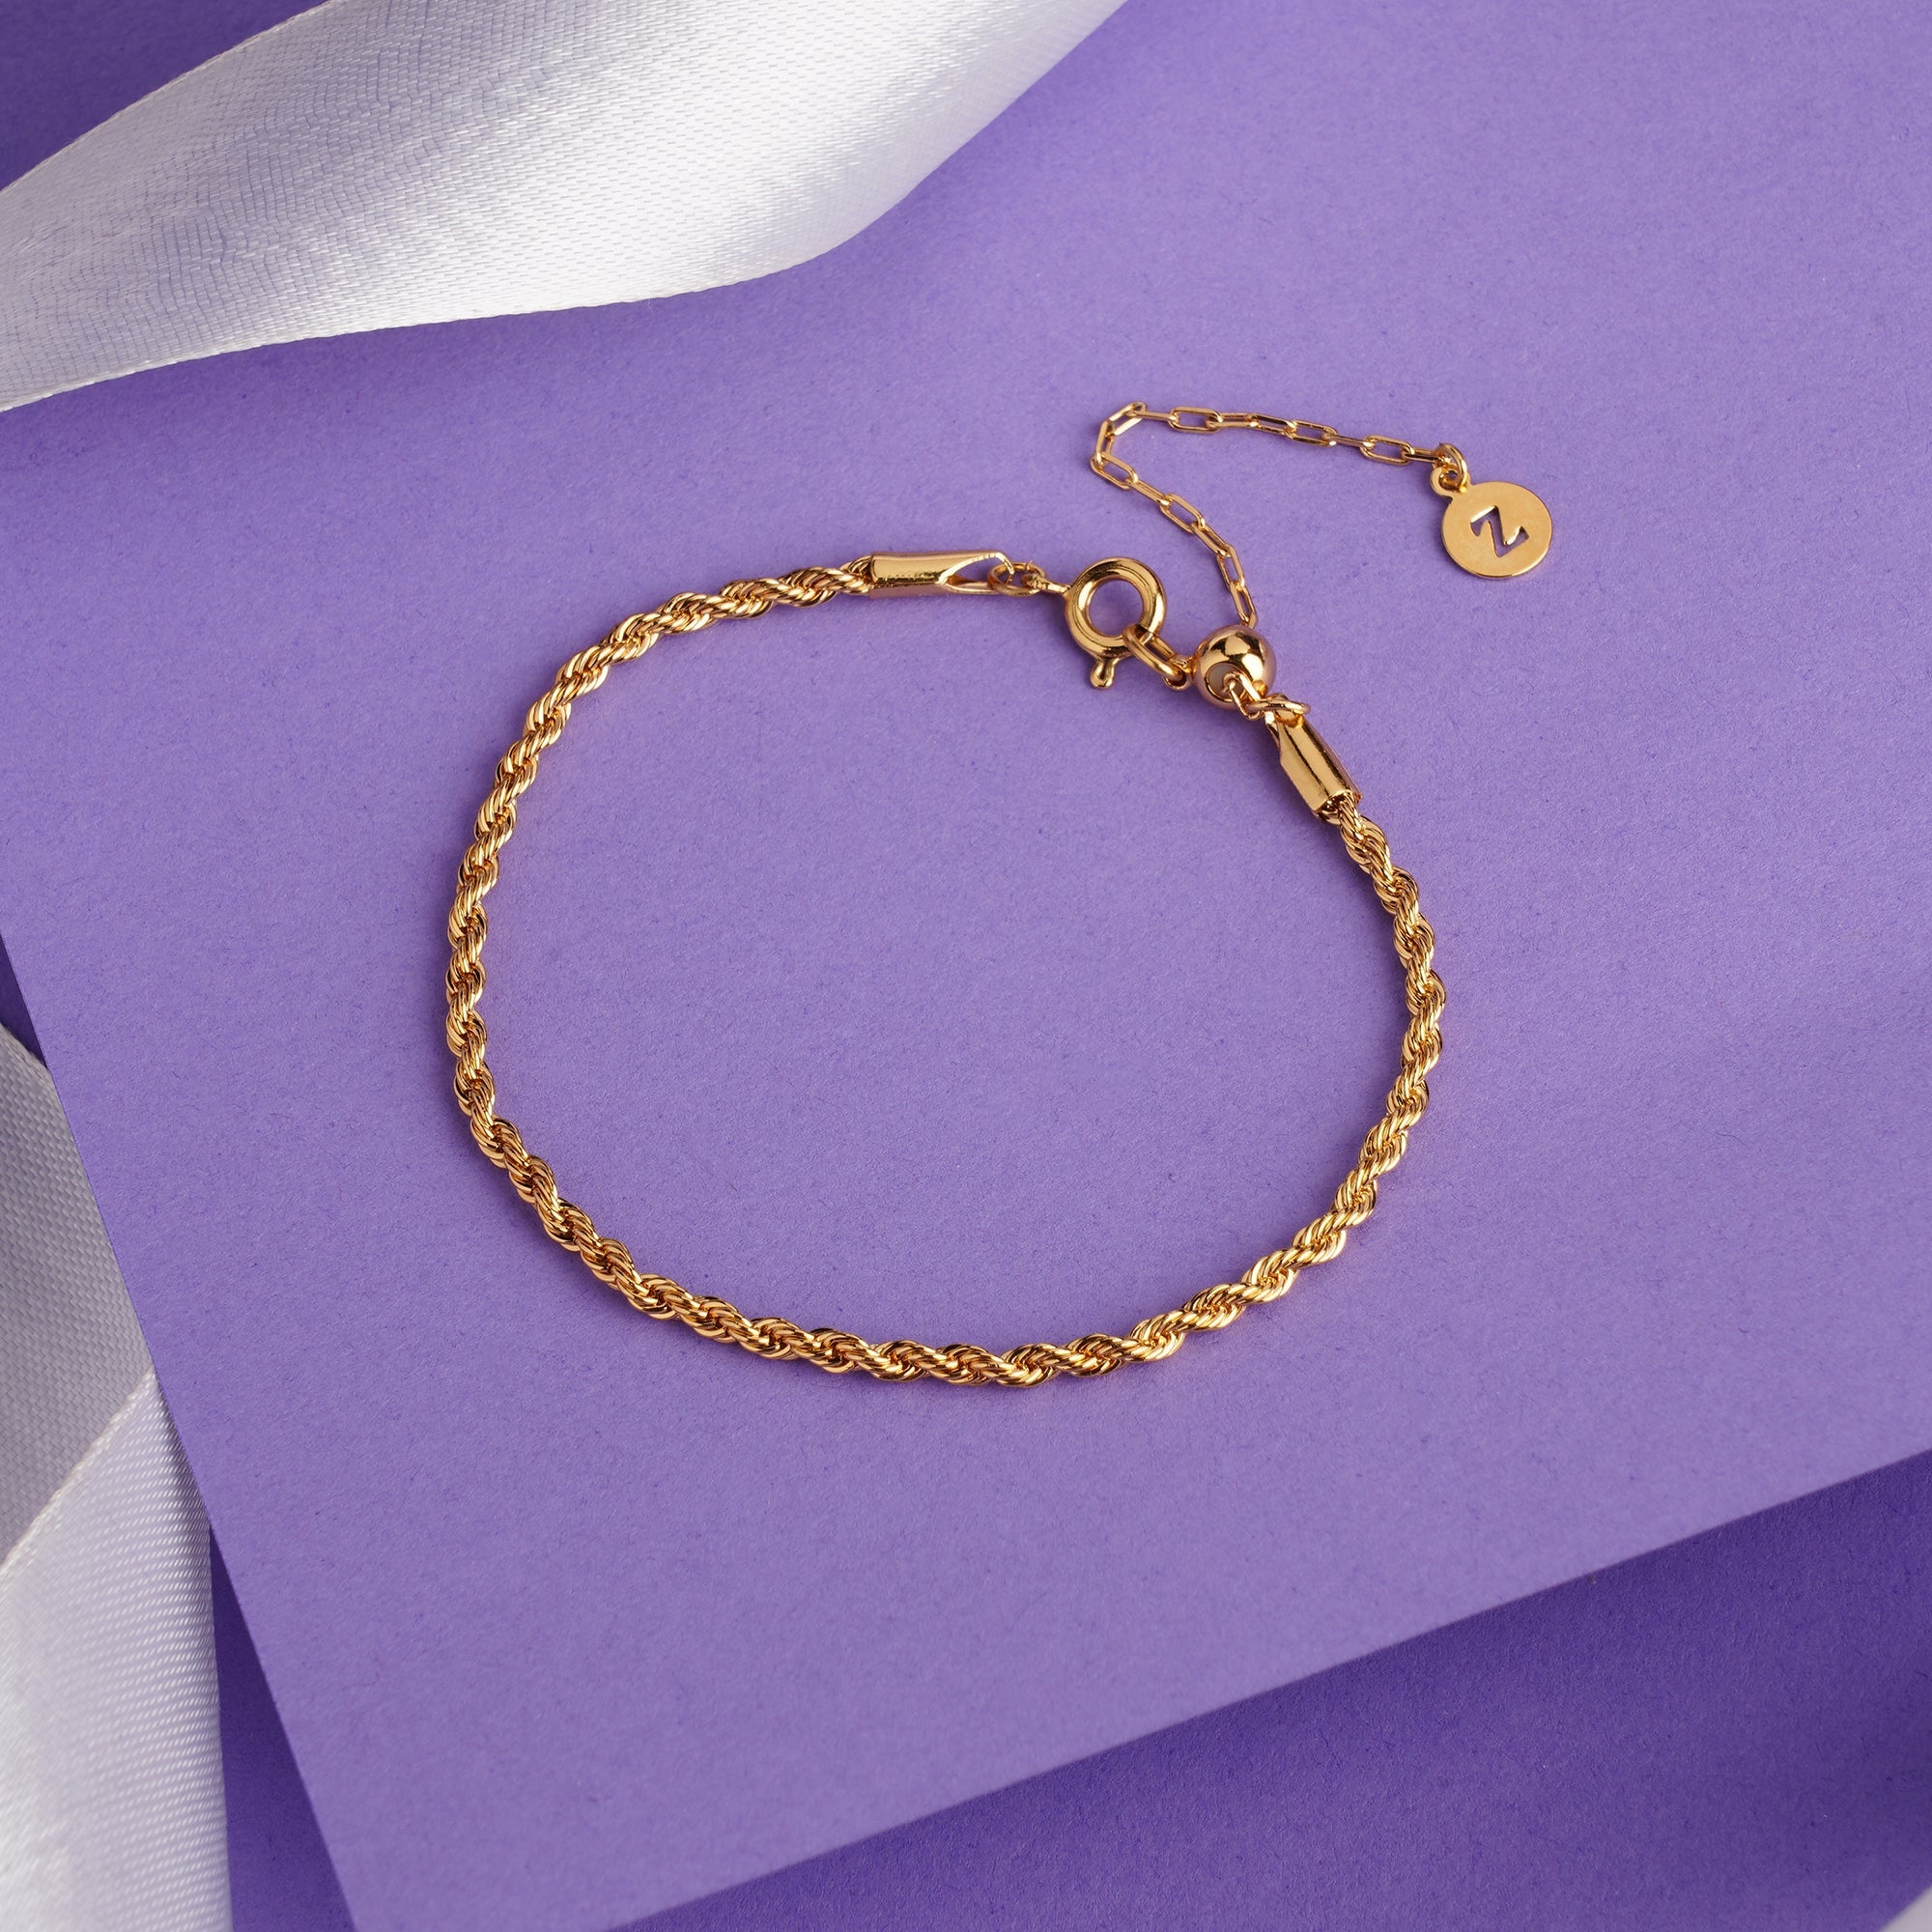 Real Gold Plated Rope Slider Bracelet For Women By Accessorize London